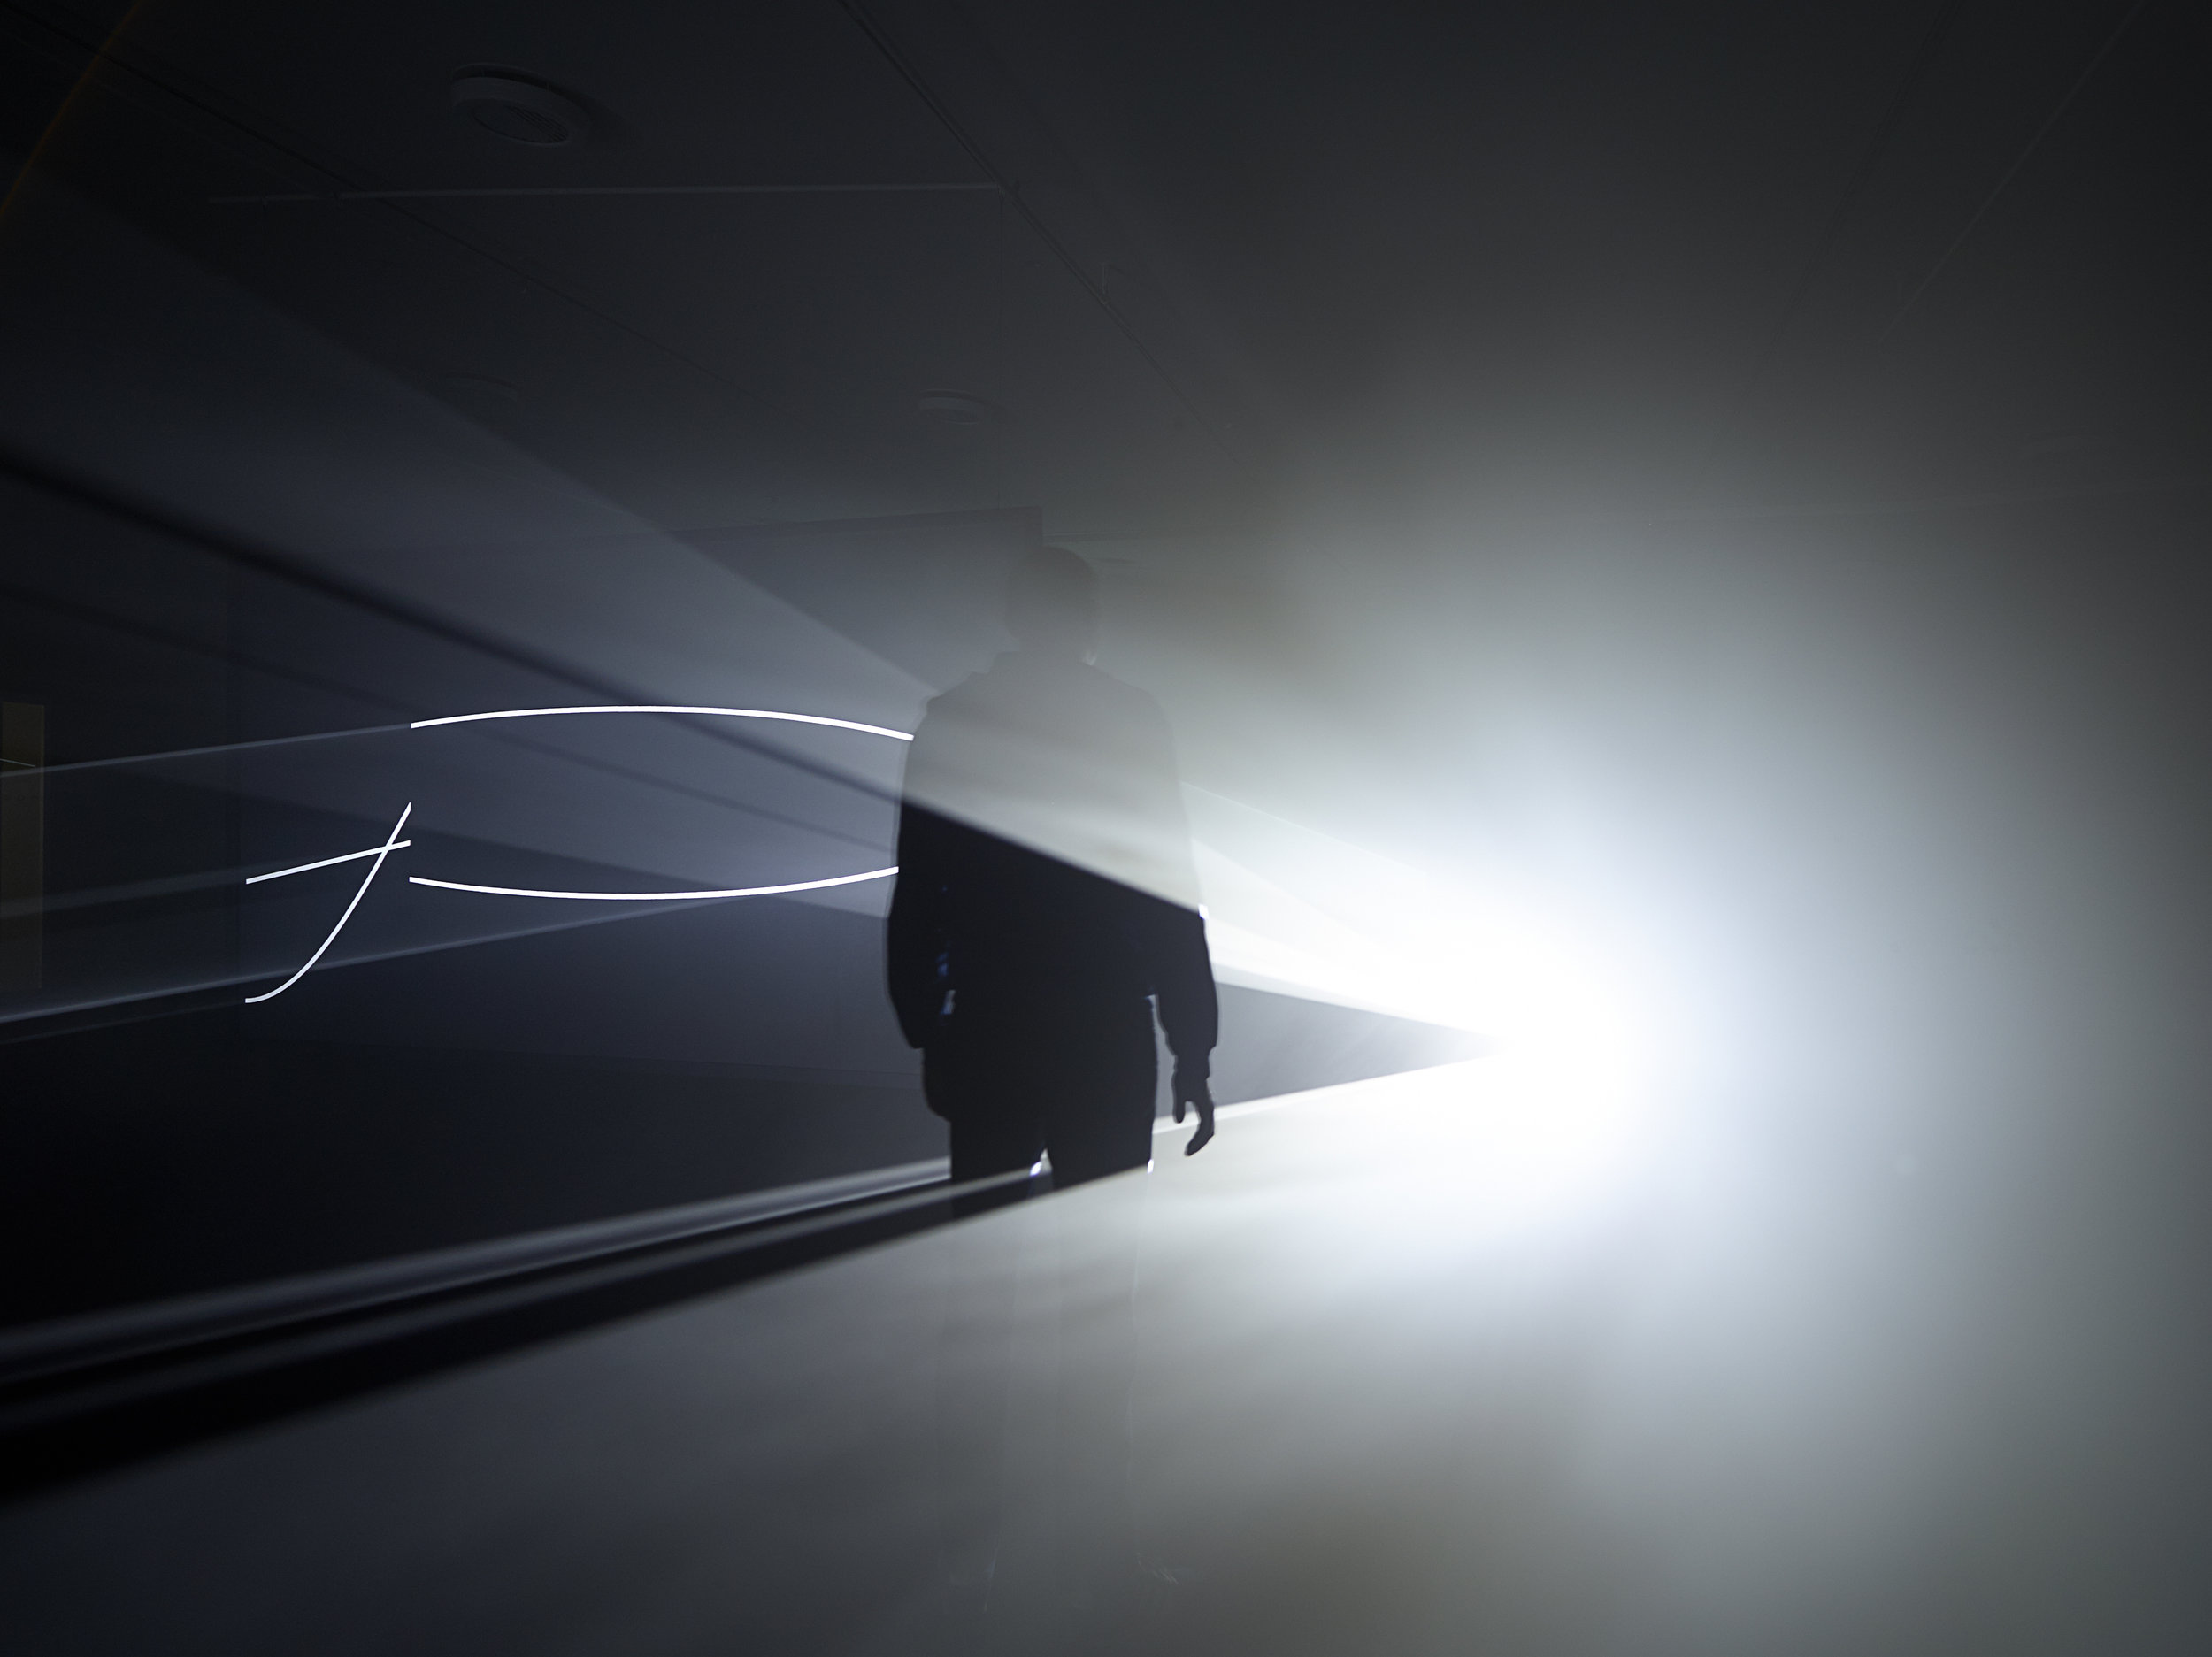  Anthony McCall. "Face to Face II" (2013). Installation view, Eye Film Museum, Amsterdam, 2014. Photograph by Hans Wilschut. 